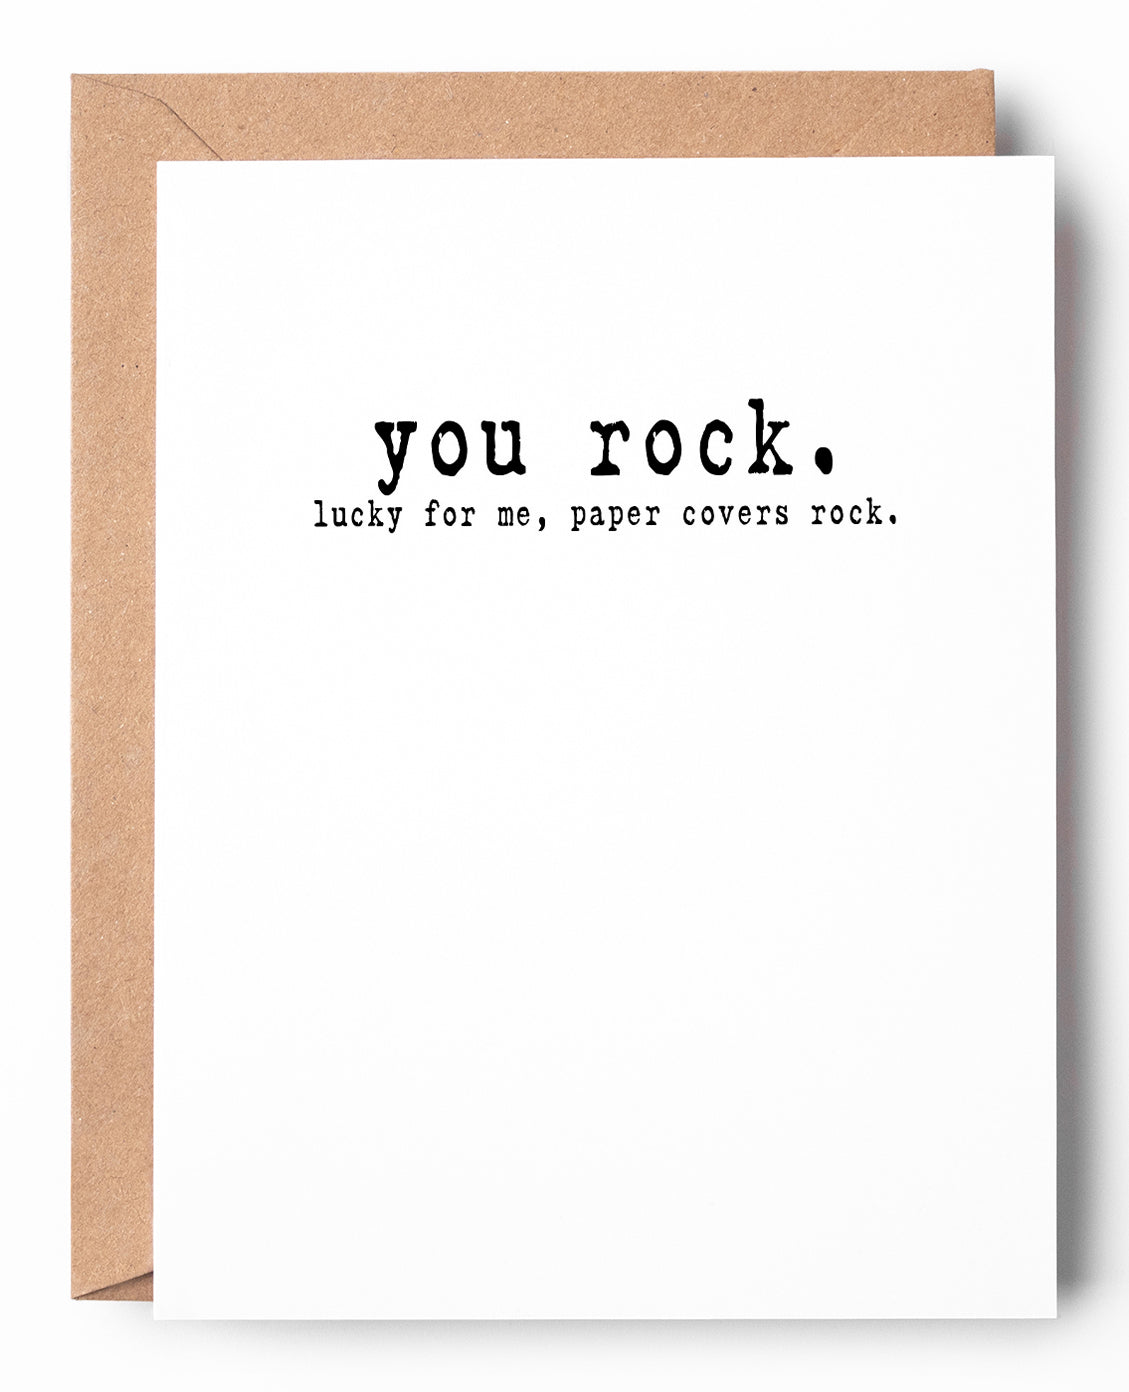 Funny letterpress thank you card that says: You rock. Lucky for me, paper covers rock.